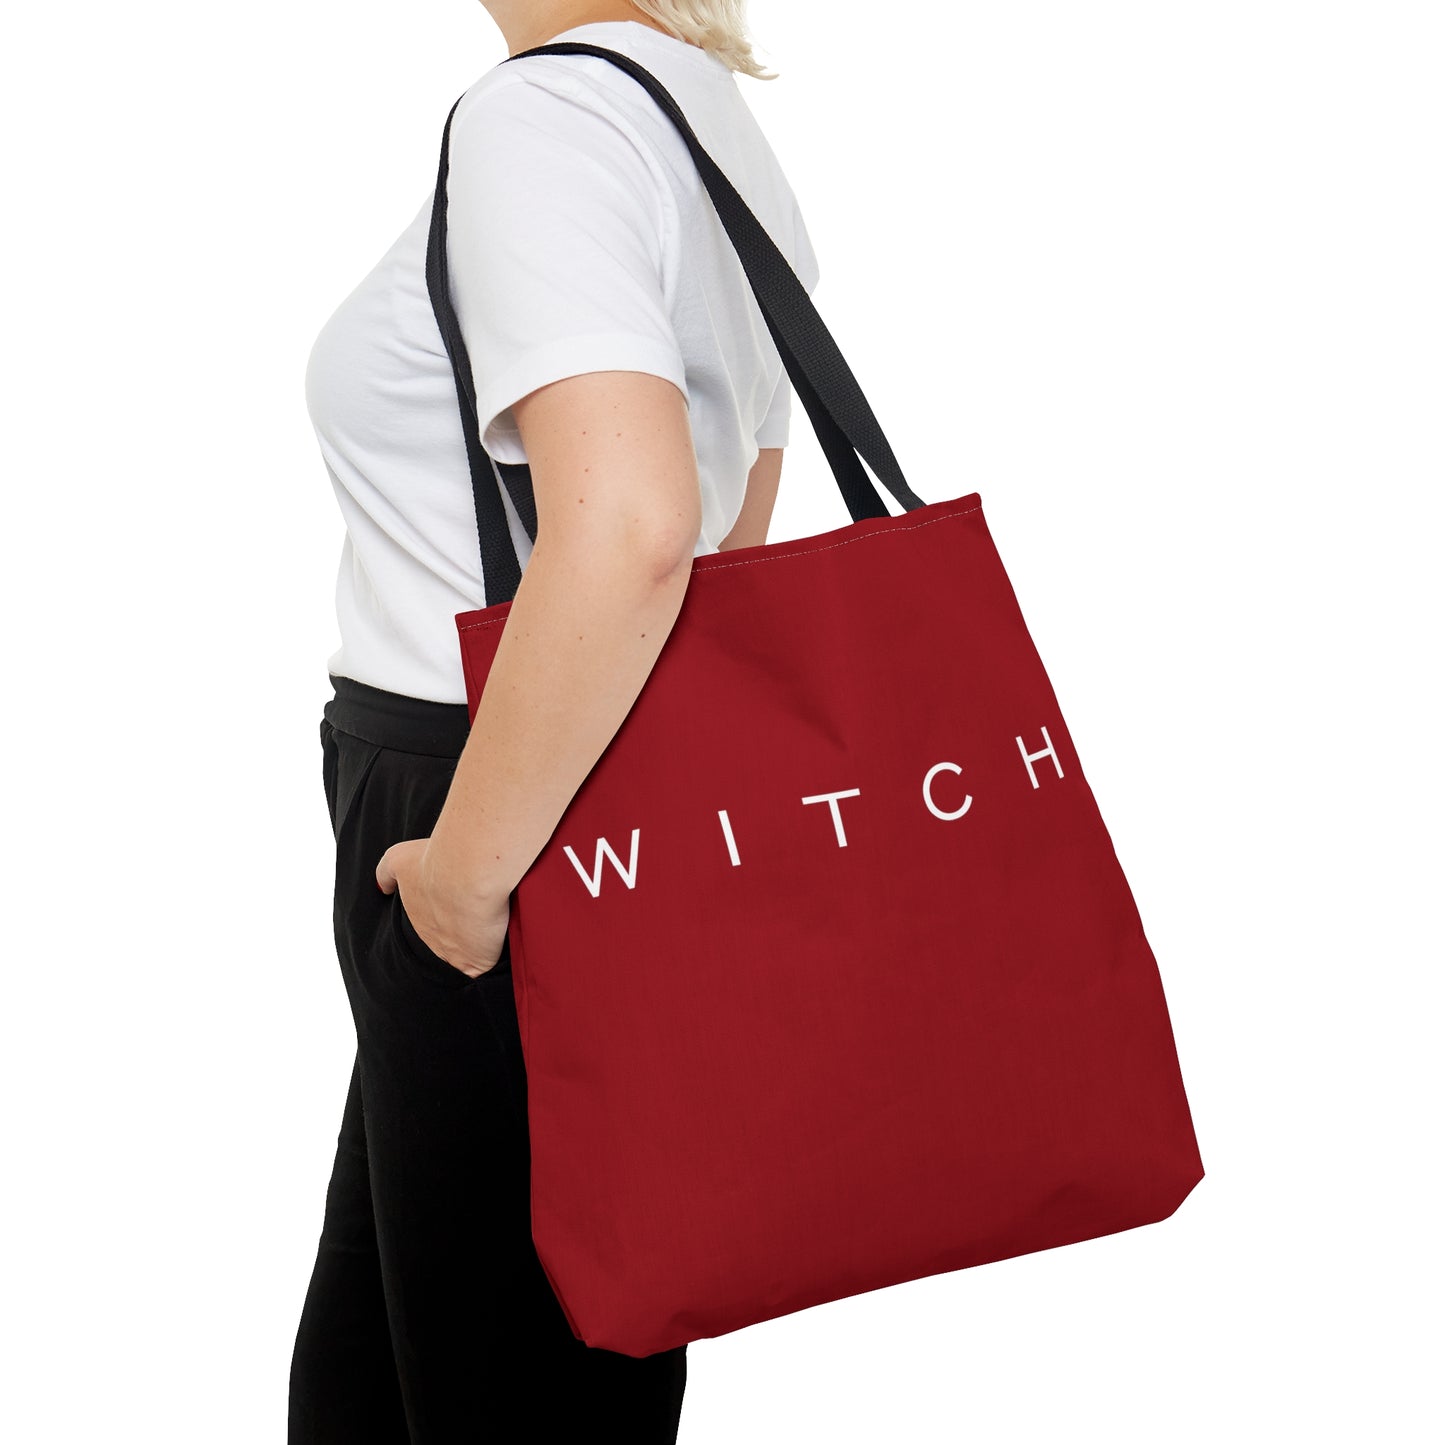 Red WITCH tote - Passion